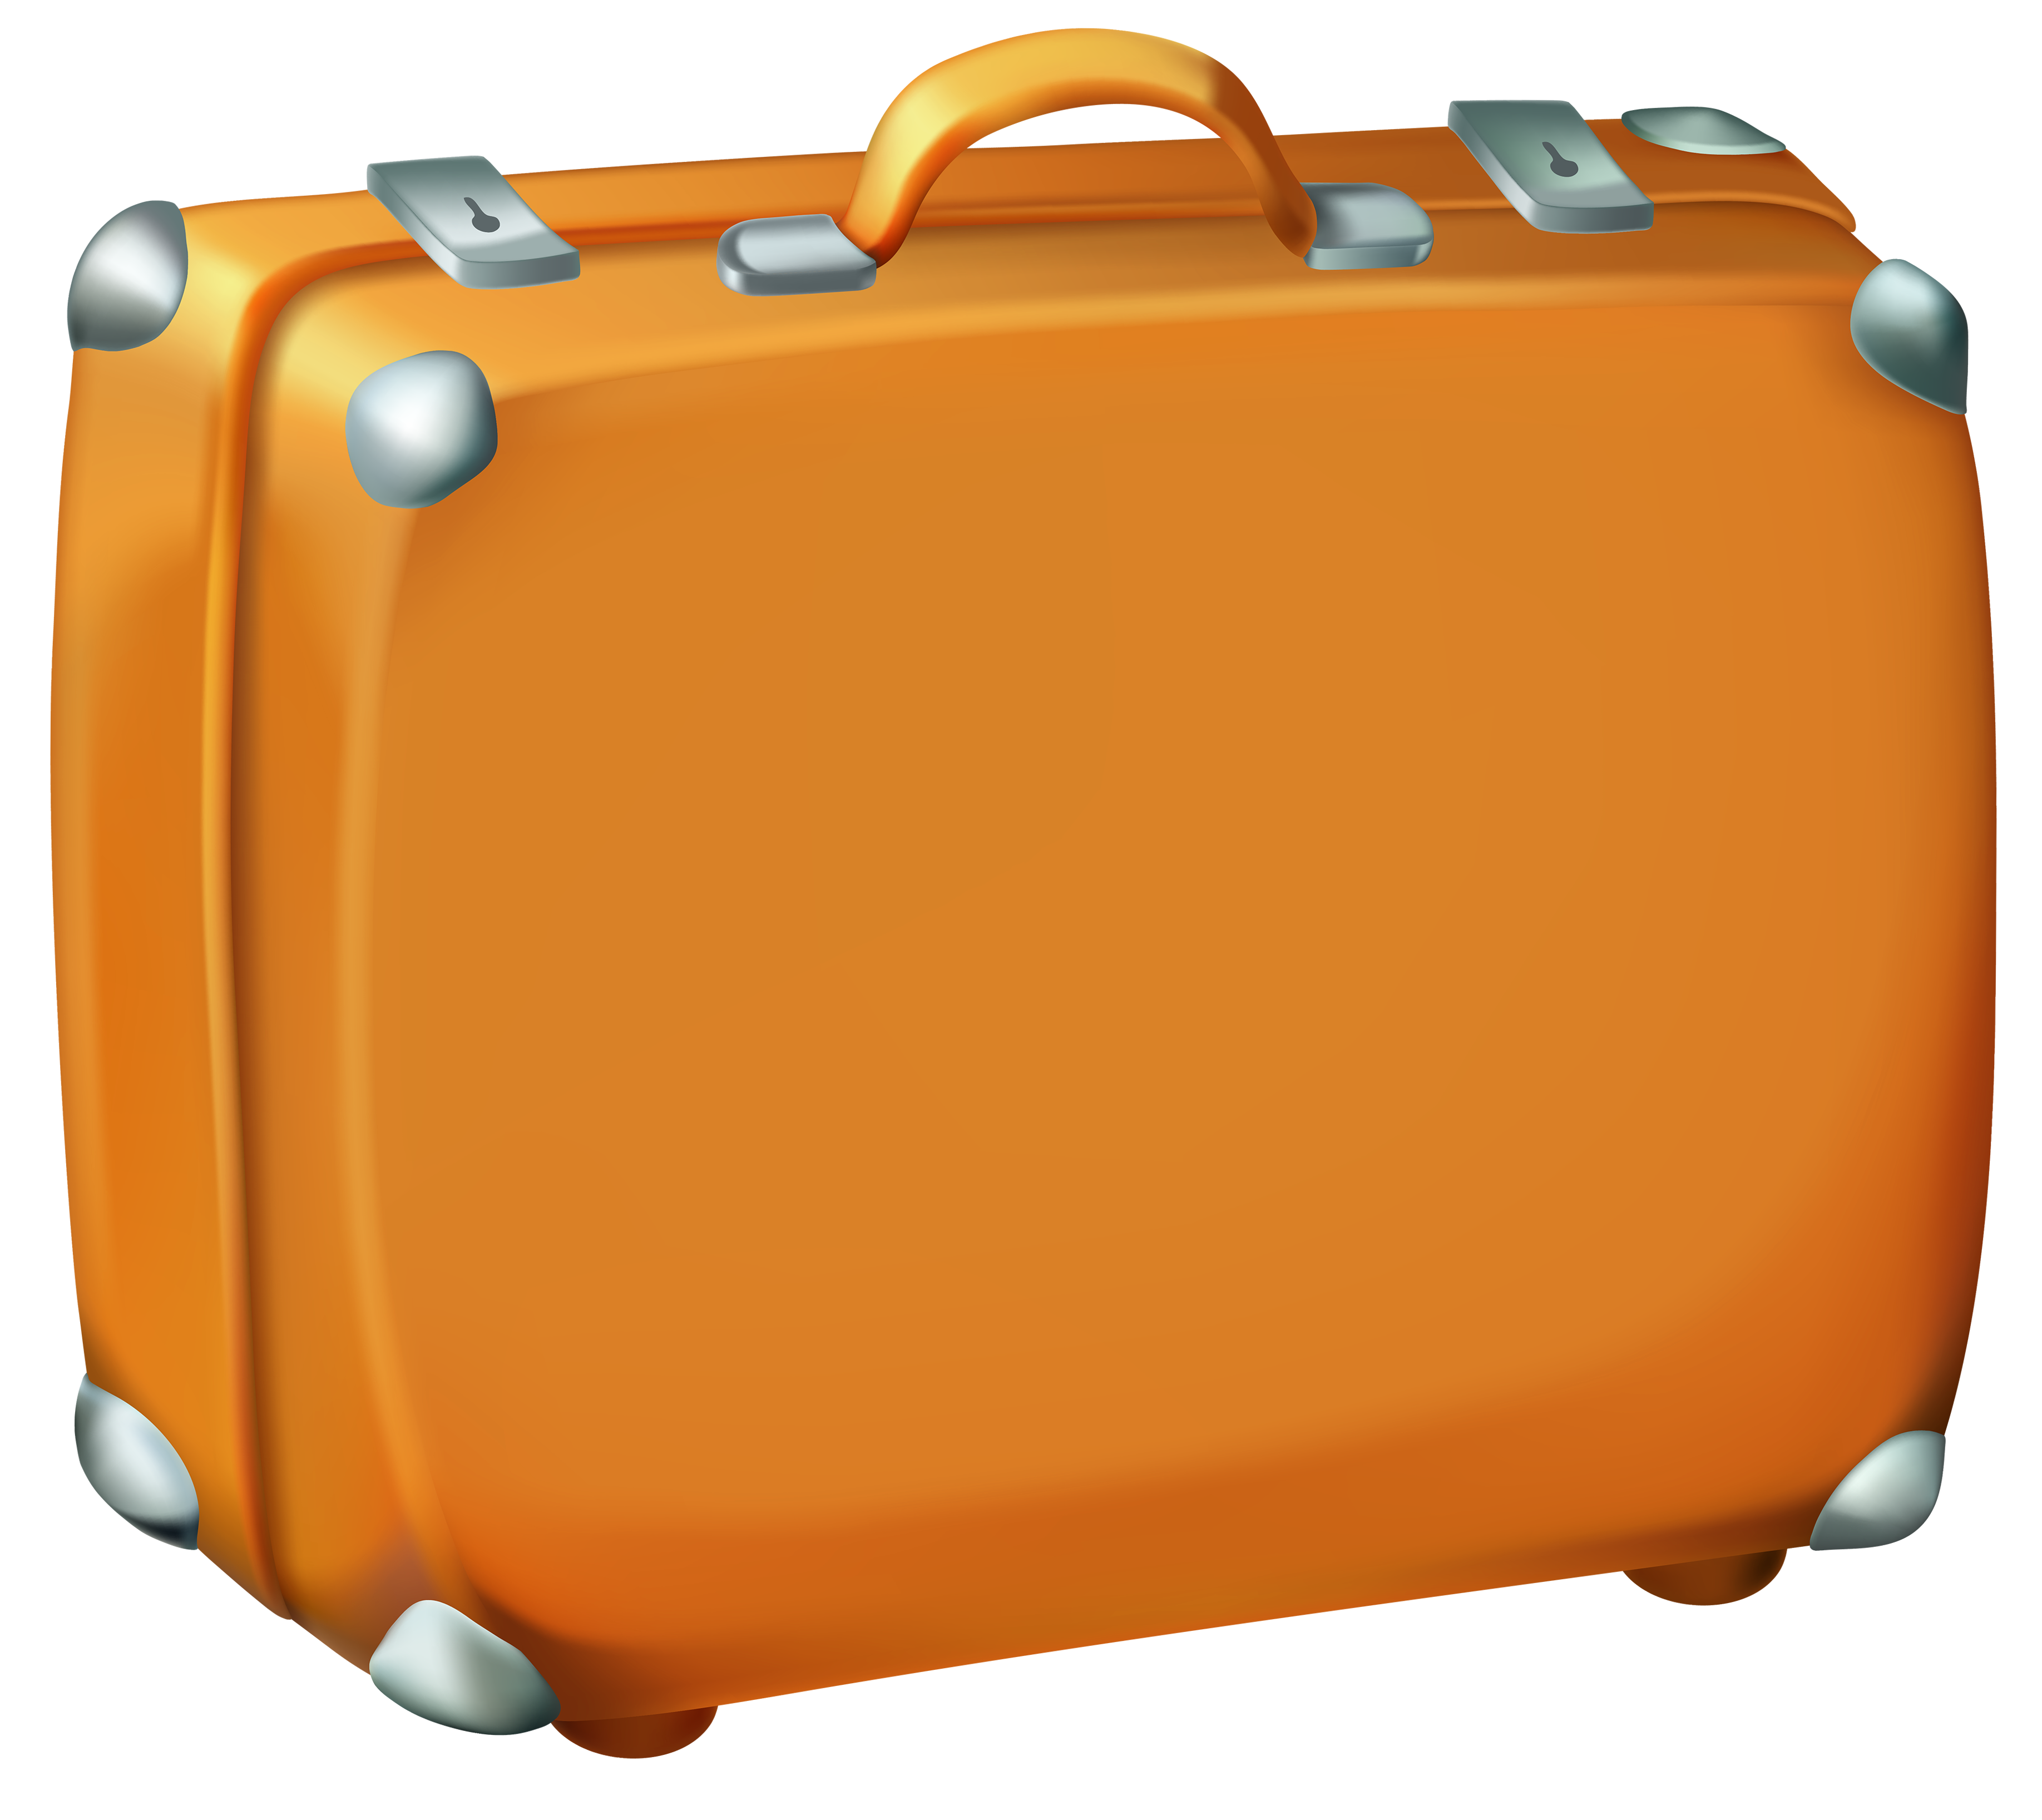 travel clipart luggage - photo #36